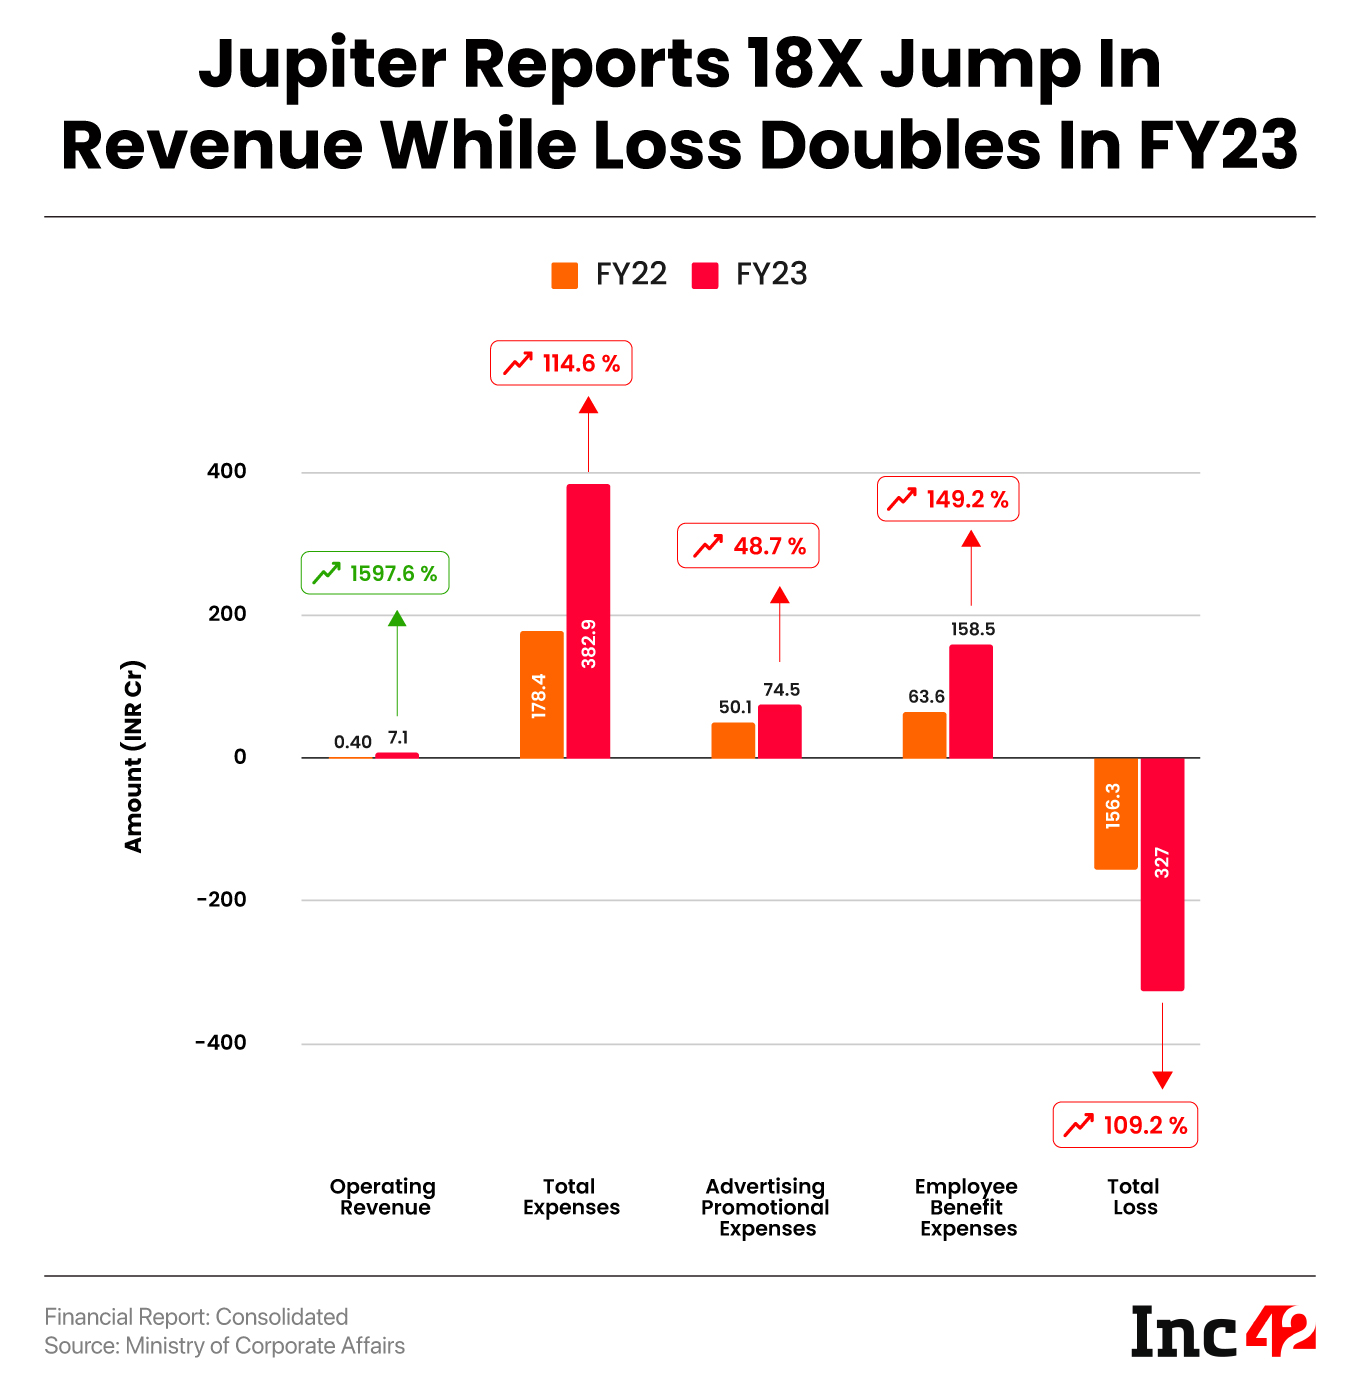 Jupiter Reports 18X Jump In Revenue While Loss Doubles In FY23